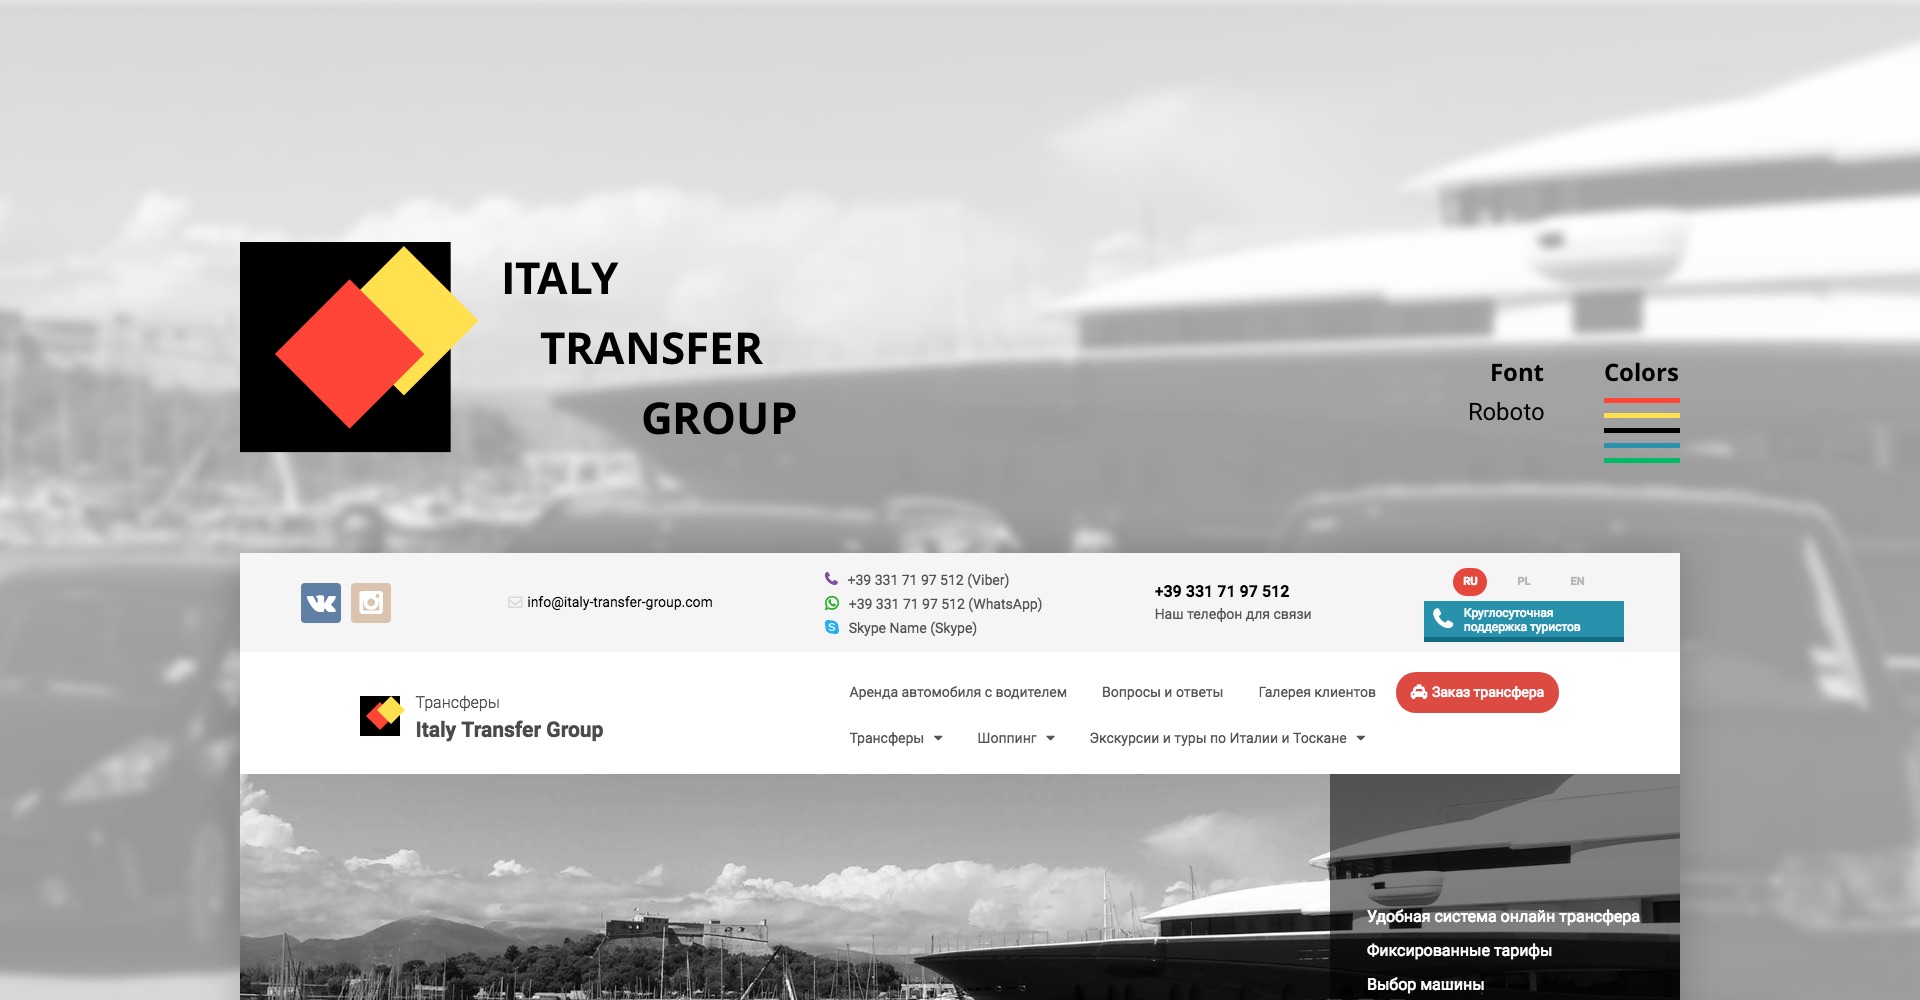 Italy Transfer Group